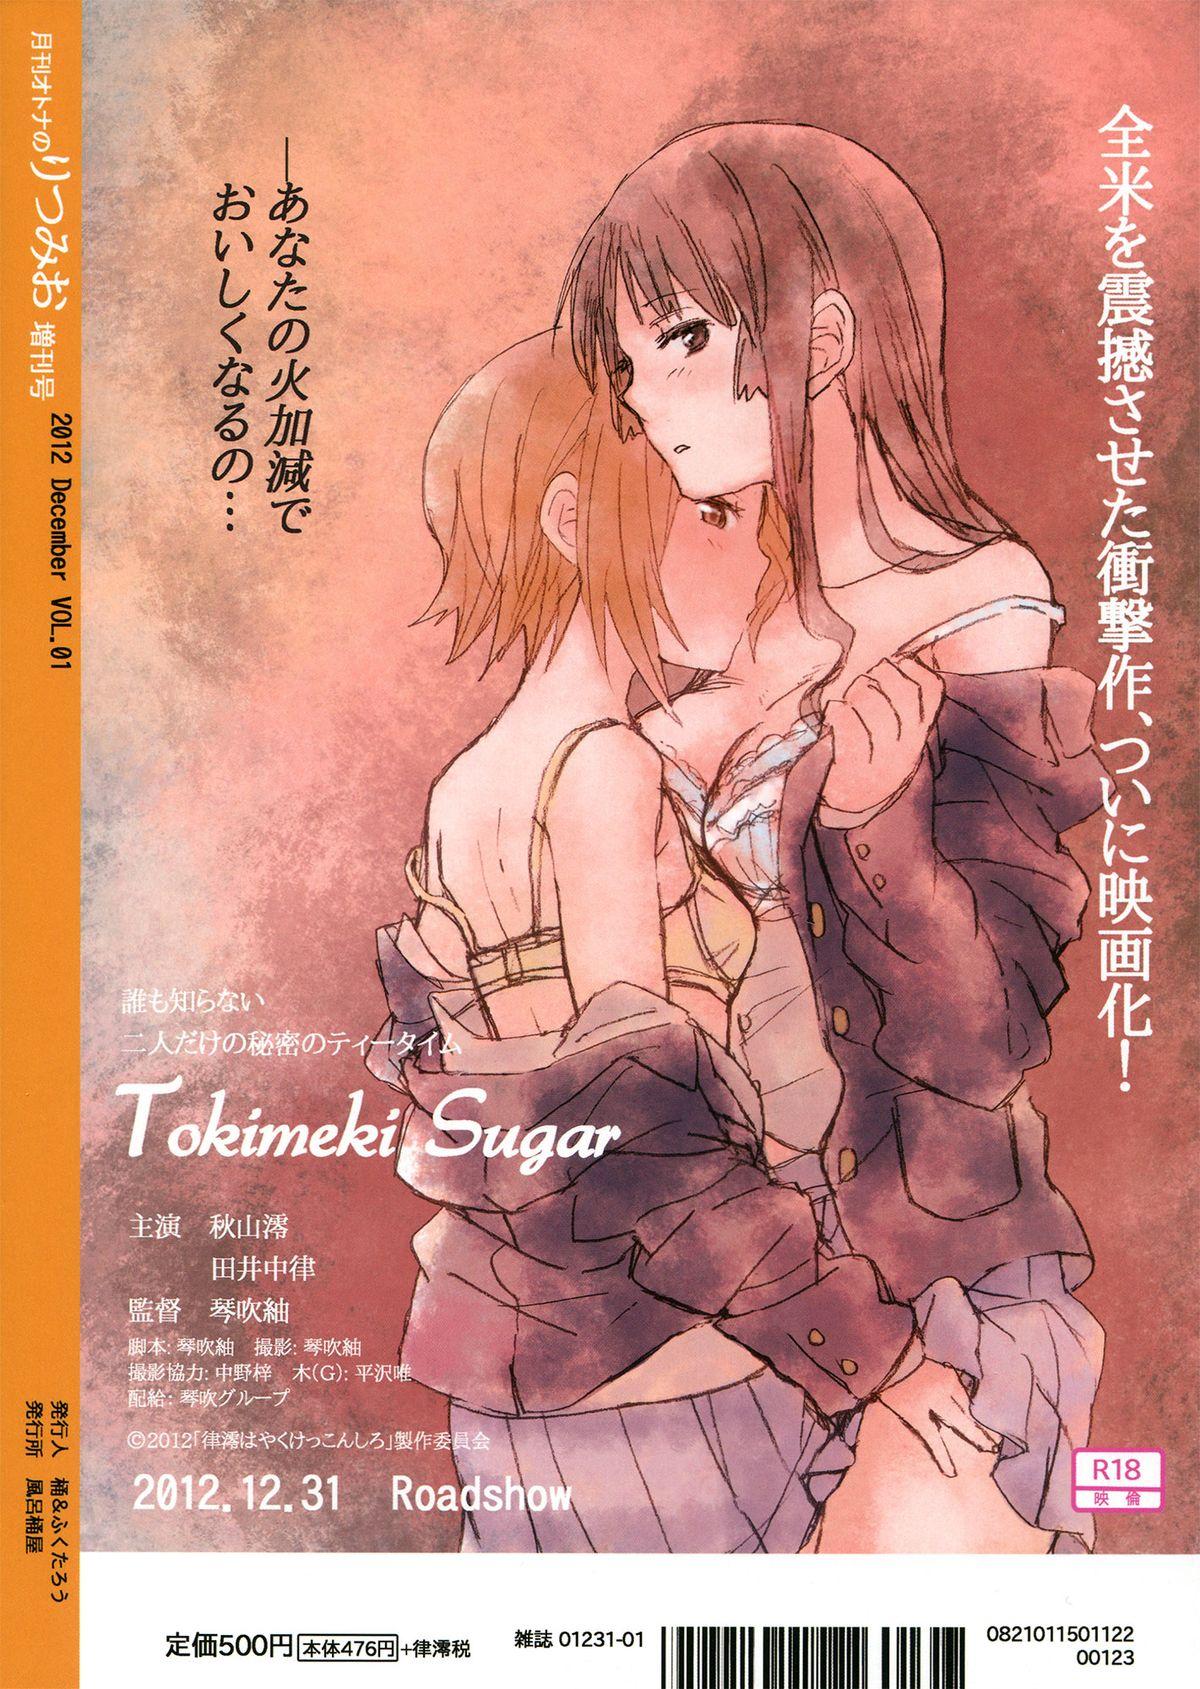 Flash Gekkan Otona no RitsuMio Zoukangou | Monthly RitsuMio for Adults - Special Edition - K on Firsttime - Page 50